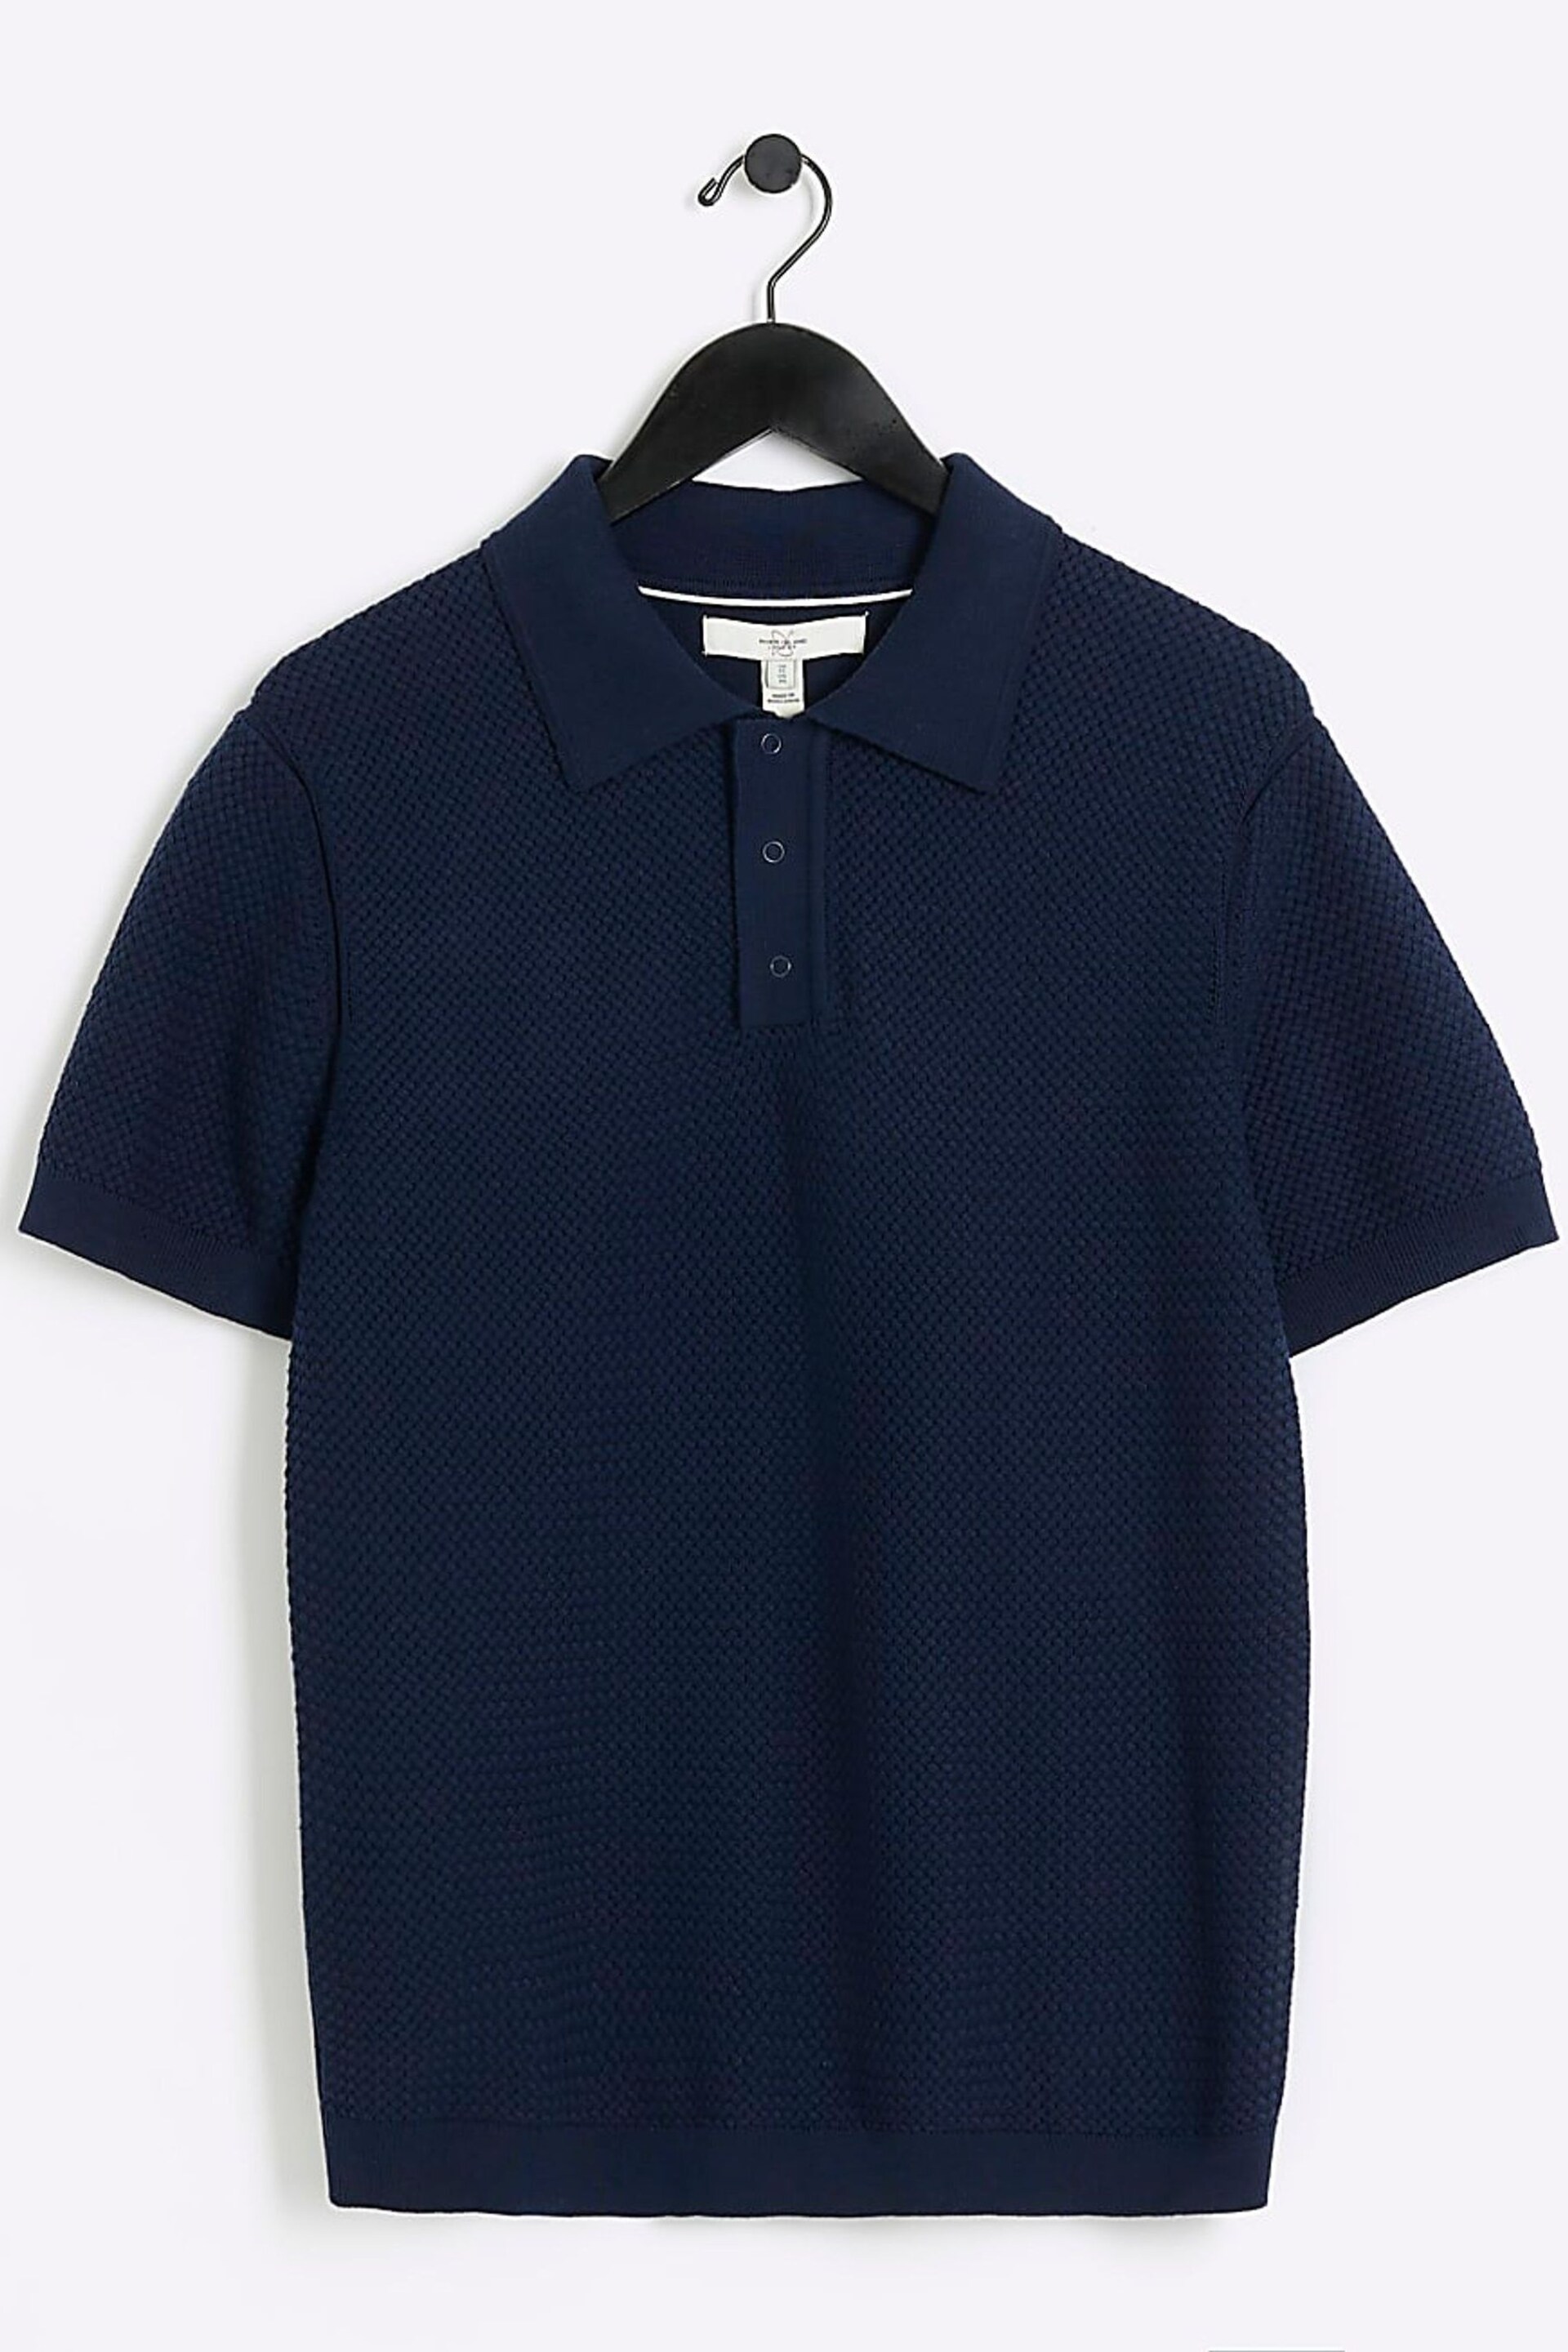 River Island Blue Textured Knitted Polo Shirt - Image 5 of 6